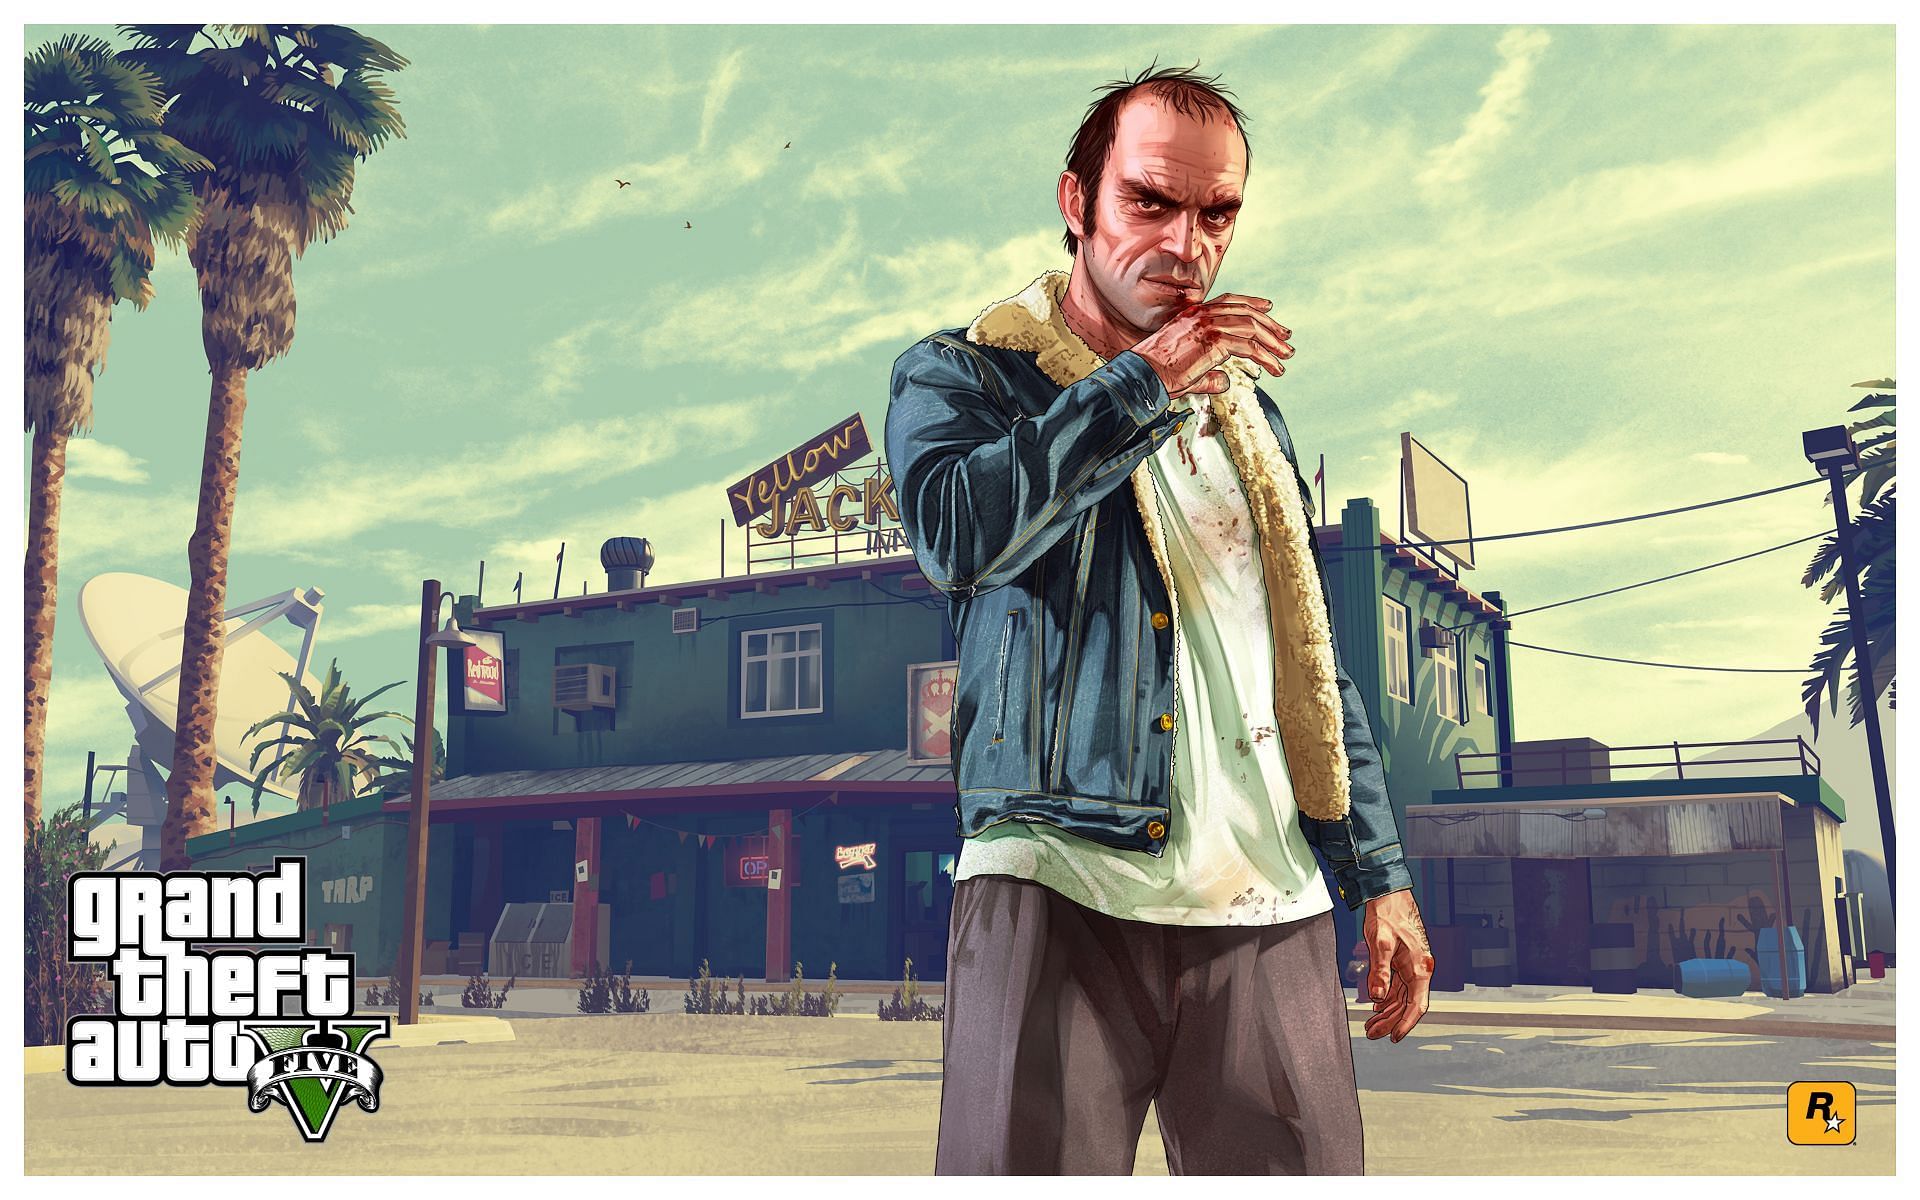 Gamers can now get Grand Theft Auto 5 for cheaper price (Images via Rockstar Games